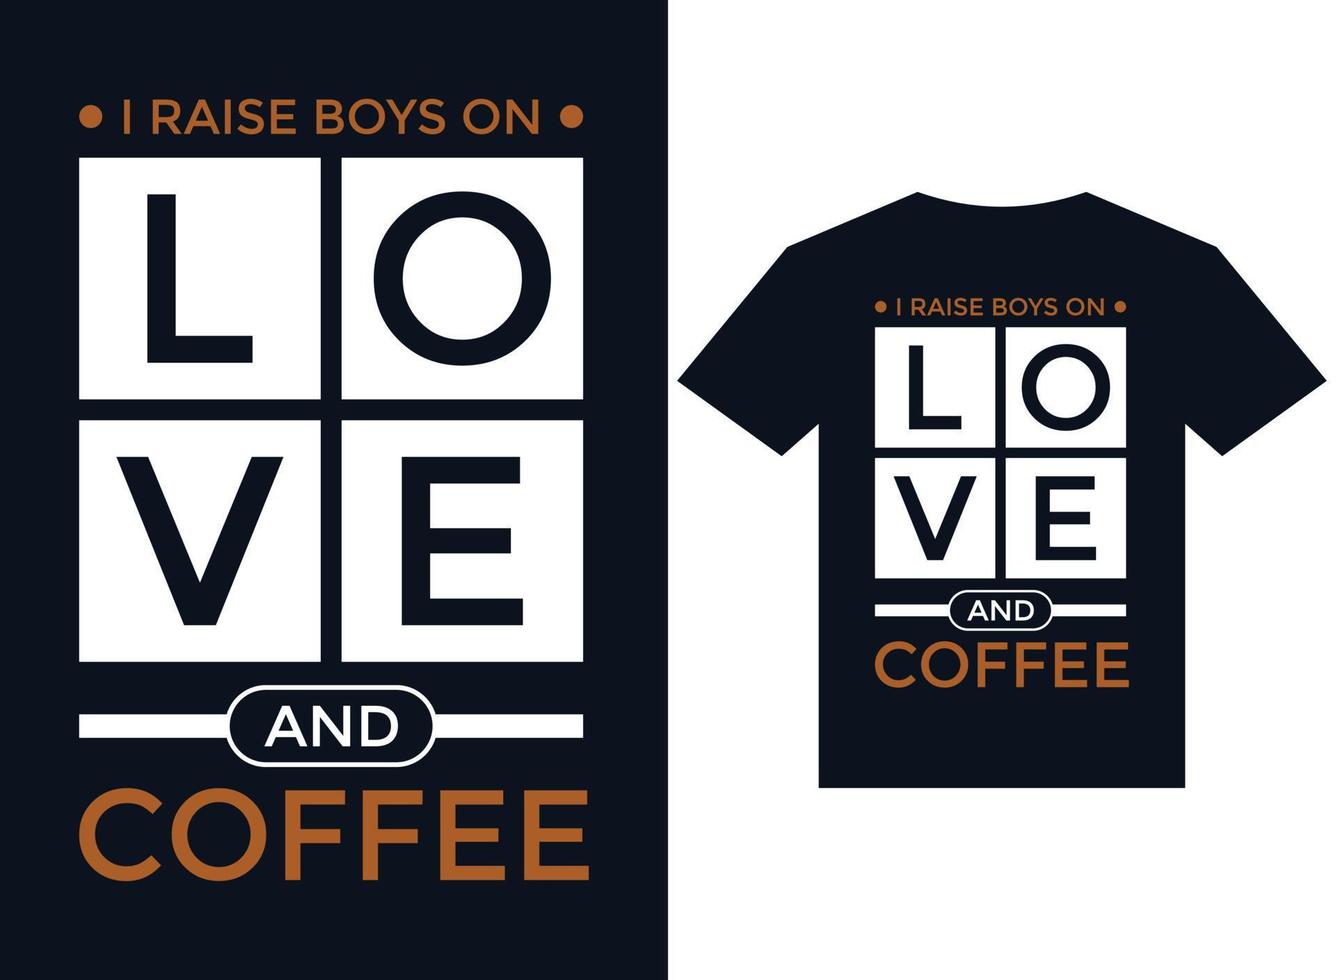 I raise boys on love and coffee t-shirt design typography vector illustration files for printing ready